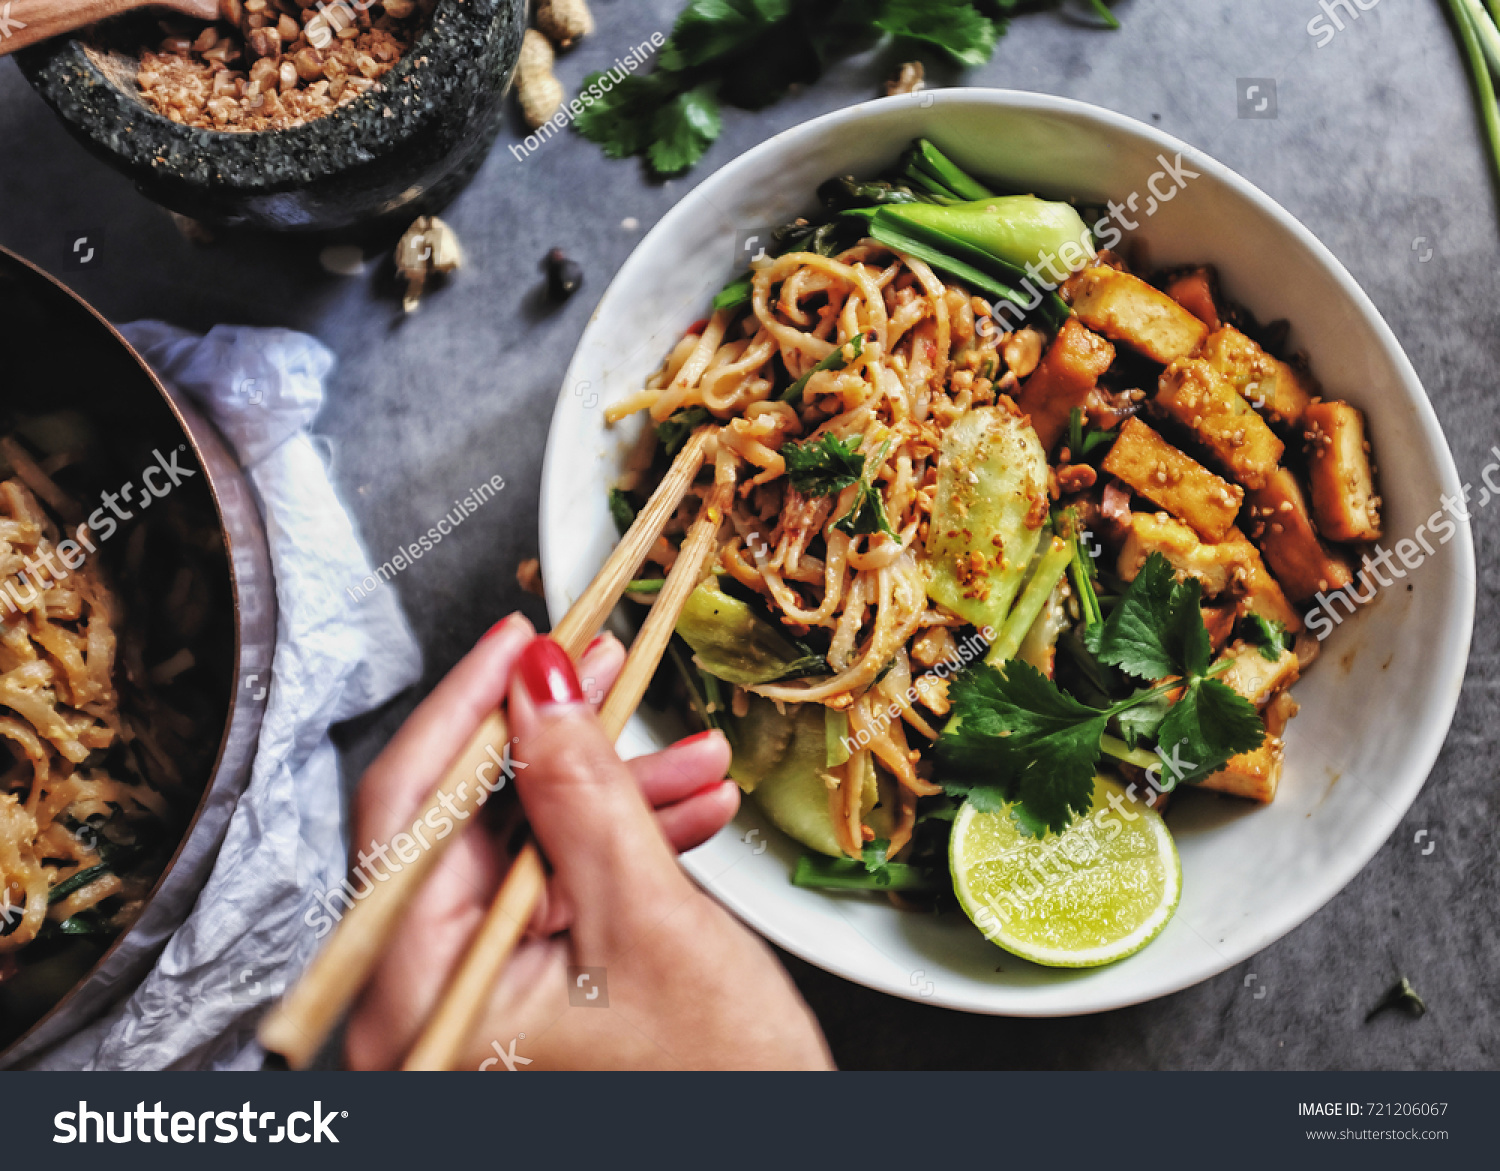  Udon with Padthai sauce, Healthy Vegetarian/vegan menu; Padthai noodle with smoke tofu and mixed vegetable - chinese baby Bok Choy , garlic chive, shallot and crushed peanut topping. chopstick hold. #721206067